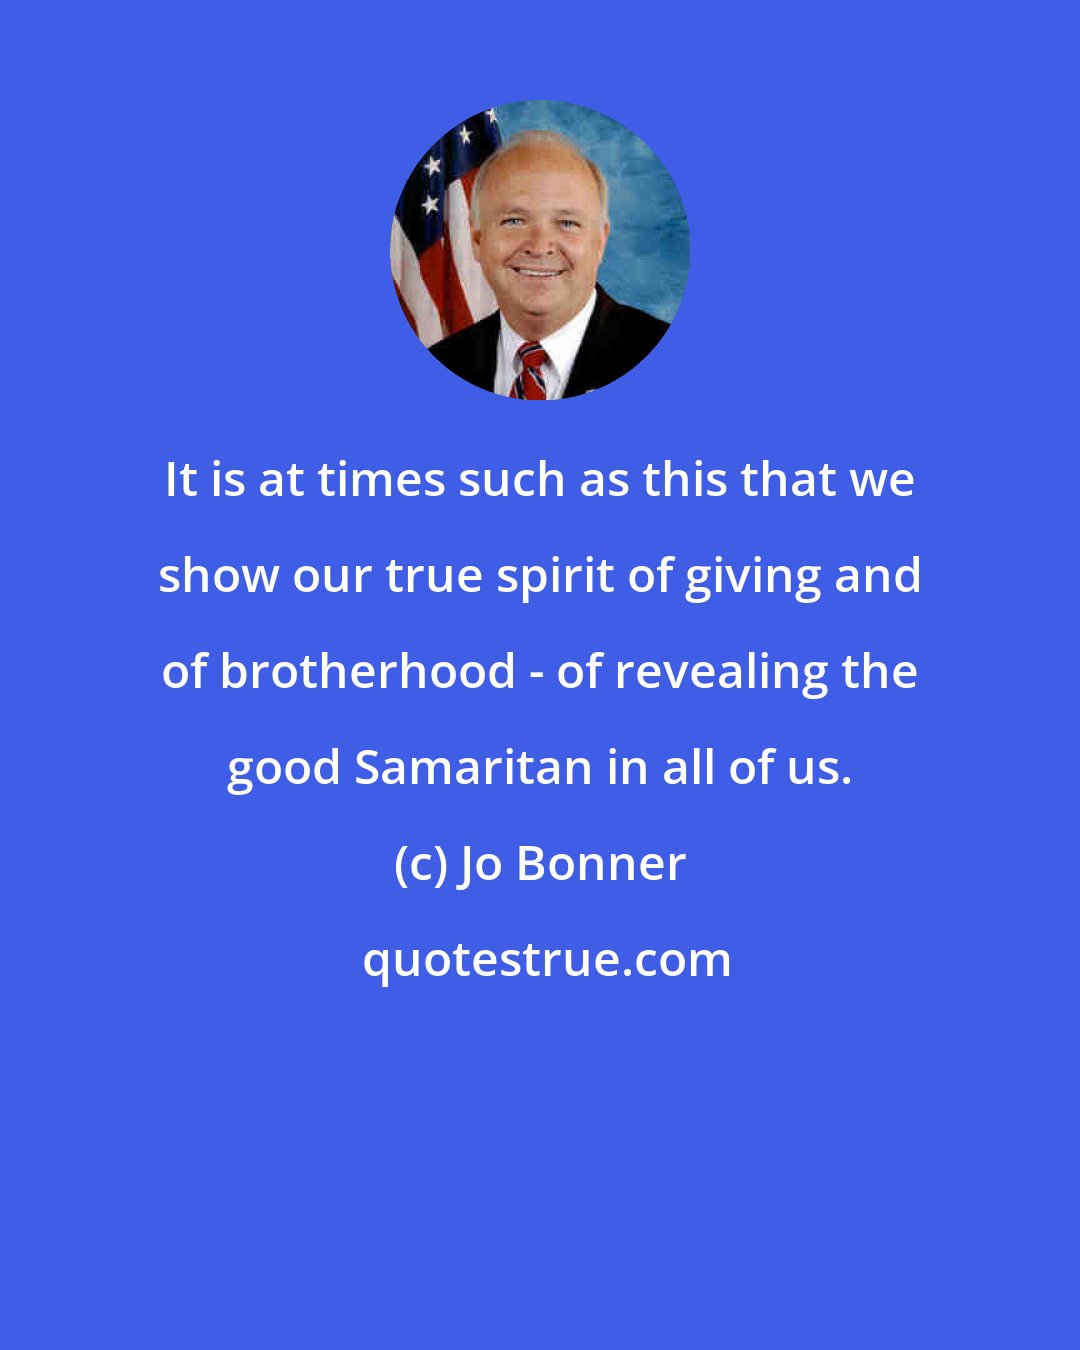 Jo Bonner: It is at times such as this that we show our true spirit of giving and of brotherhood - of revealing the good Samaritan in all of us.